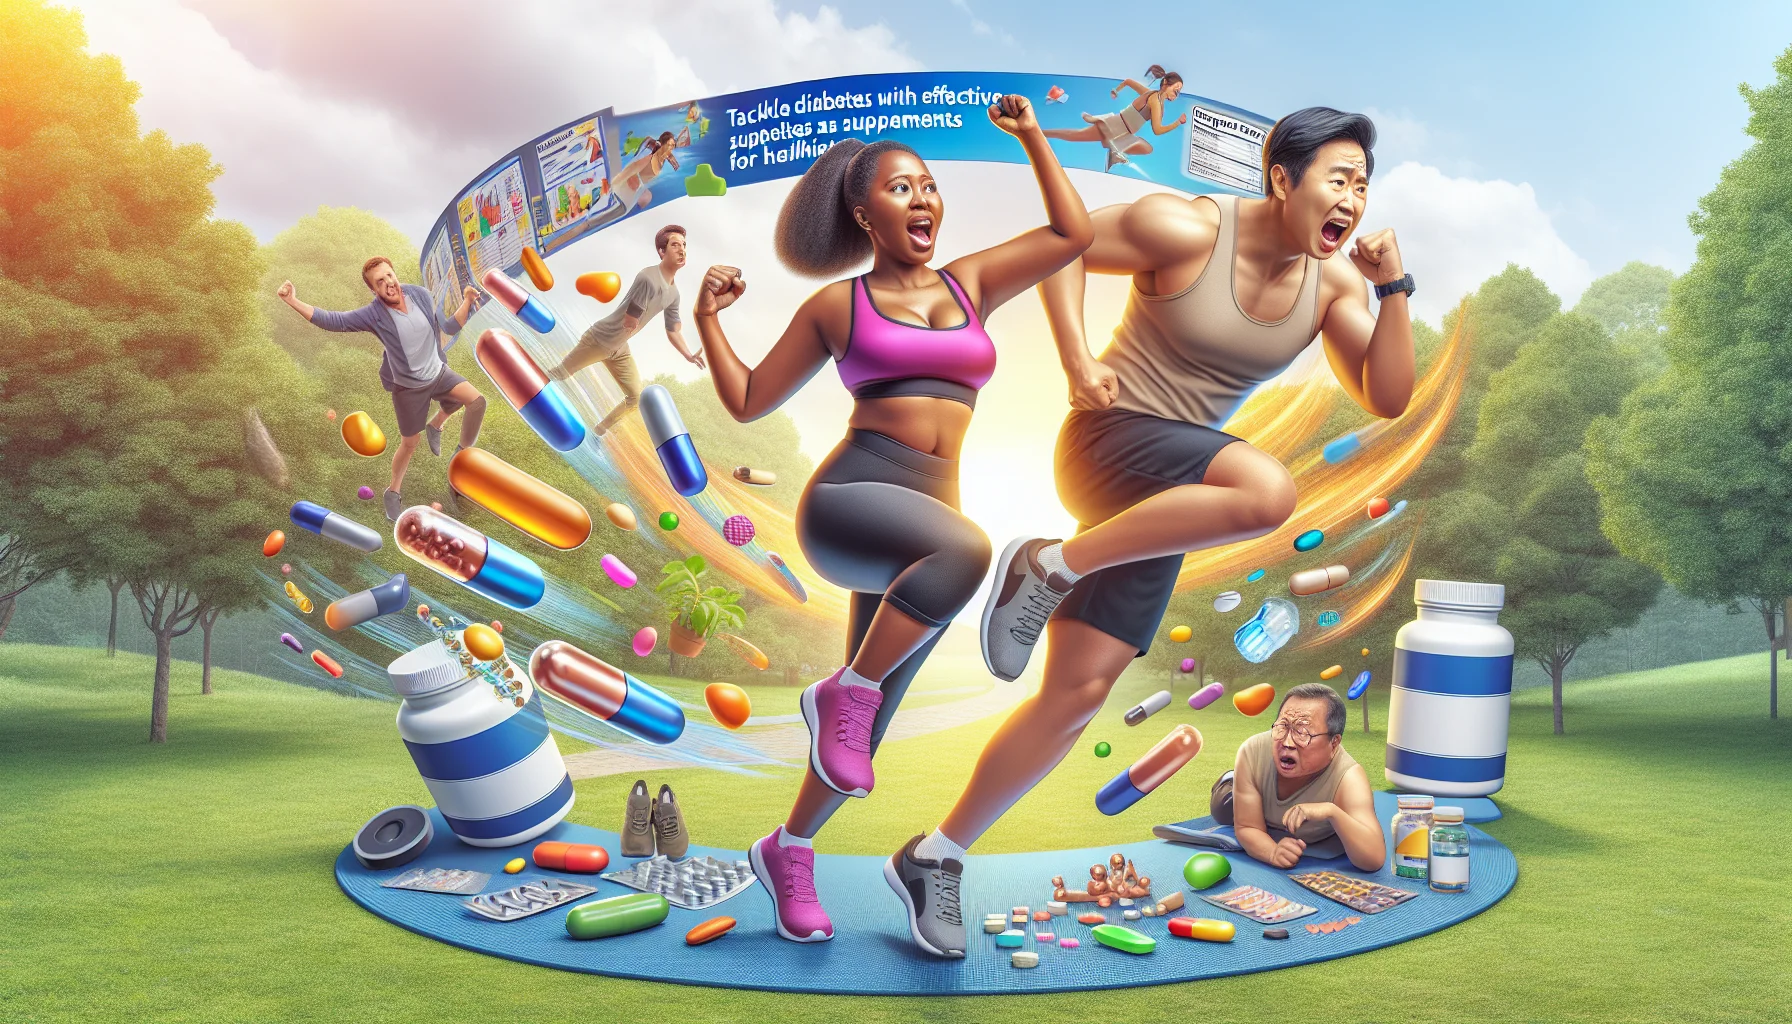 Create a realistic and humorous image featuring a bright, colorful, and energetic scene. Our main subject is a fit middle-aged black woman in exercise attire, doing aerobic exercises with plenty of enthusiasm. Next to her, a neutrally dressed middle-aged Asian man is struggling to keep up, panting with exhaustion, yet determined. The scene is set in a lush park on a sunny day. Displayed in mid-air, are supplements under a banner saying 'Tackle Diabetes with Effective Supplements for a Healthier Life'. Also, show an array of different exercise-themed icons (like running shoes, water bottles, etc.) scattered around to promote activity and wellness.